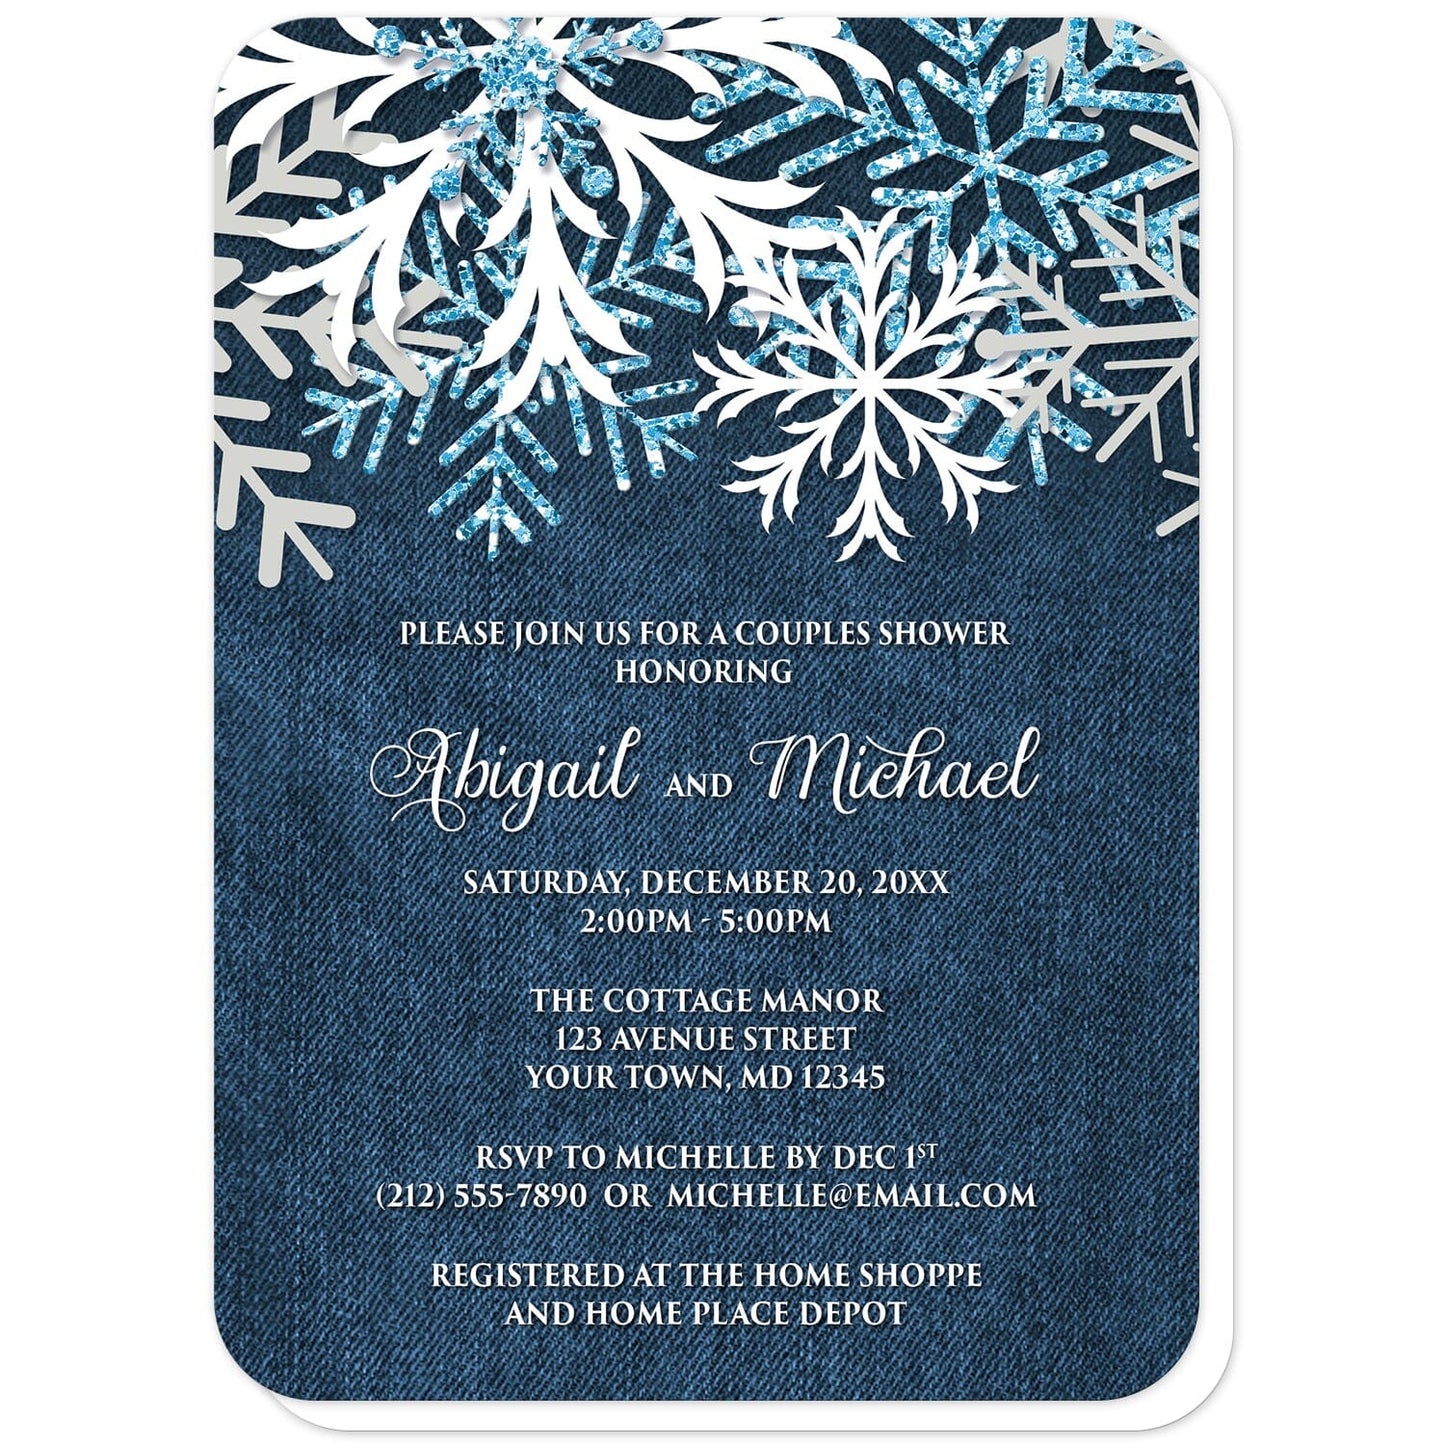 Rustic Snowflake Denim Winter Couples Shower Invitations (with rounded corners) at Artistically Invited. Rustic snowflake denim winter couples shower invitations with white, aqua blue glitter-illustrated, and light gray snowflakes along the top over a navy blue denim design. Your personalized couples shower celebration details are custom printed in white over the blue denim background below the pretty snowflakes.